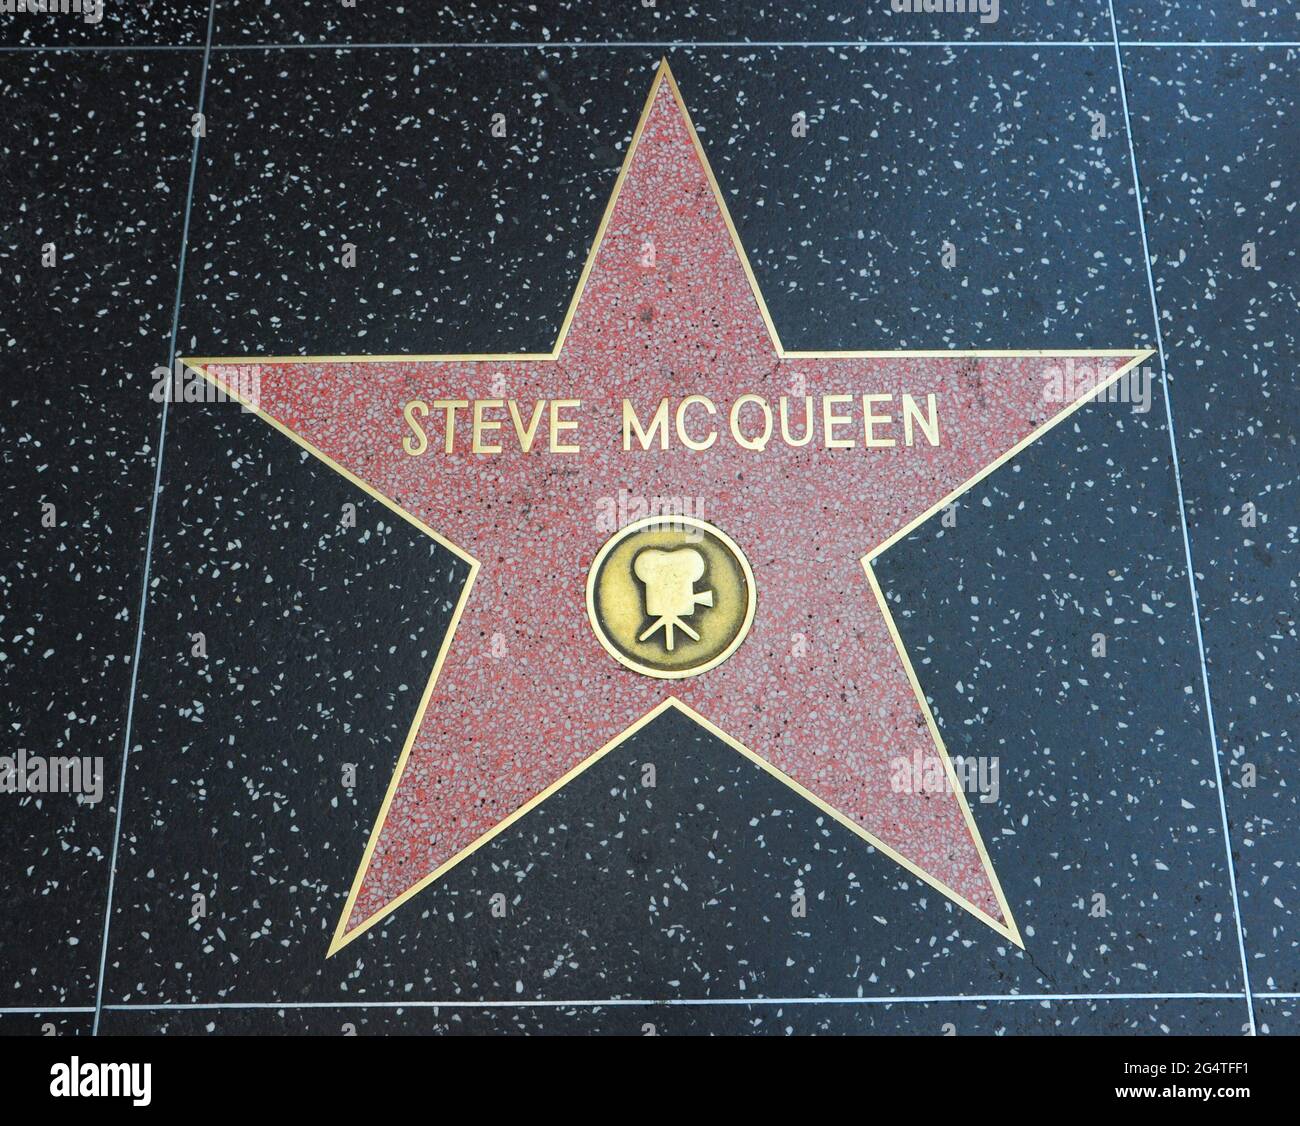 The Hollywood Walk of Fame comprises more than 2,690 five-pointed terrazzo and brass stars embedded in the sidewalks along 15 blocks of Hollywood Boul Stock Photo